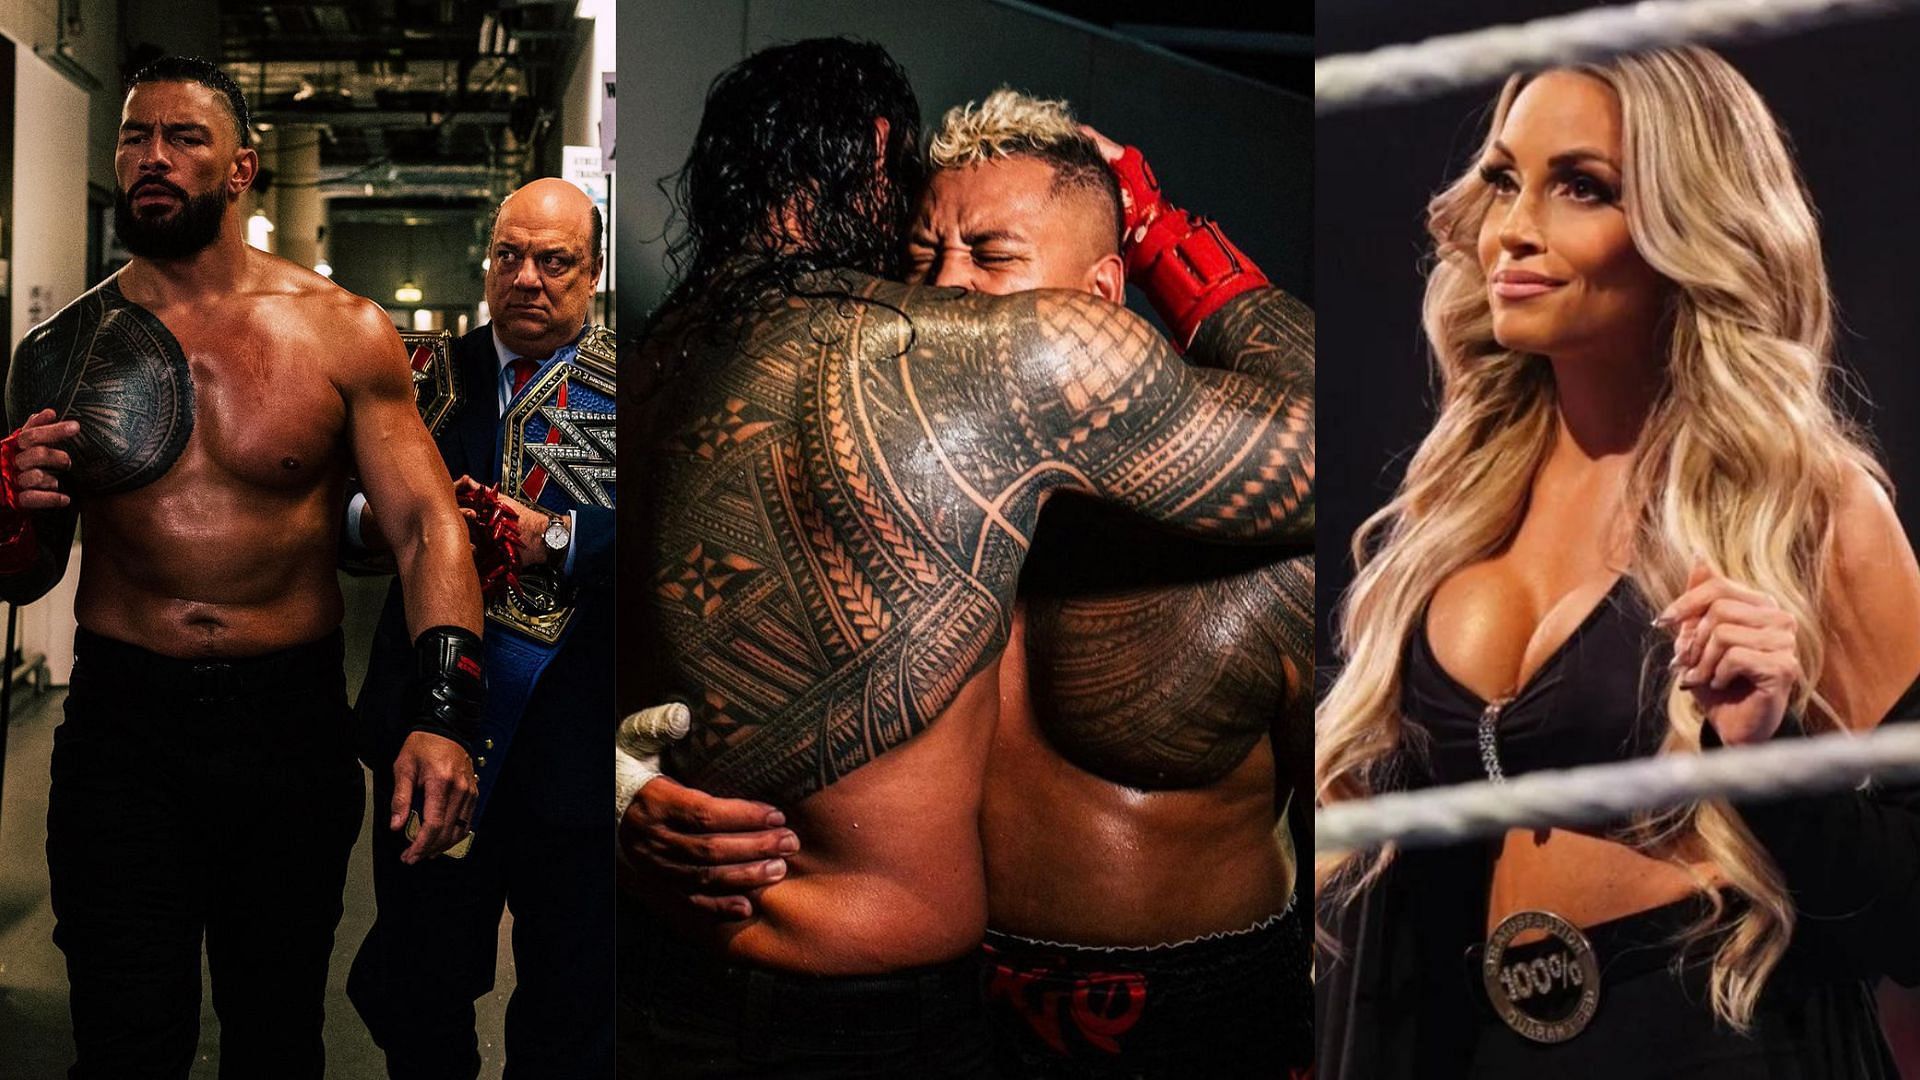 A Bloodline member was seen talking to Trish Stratus backstage